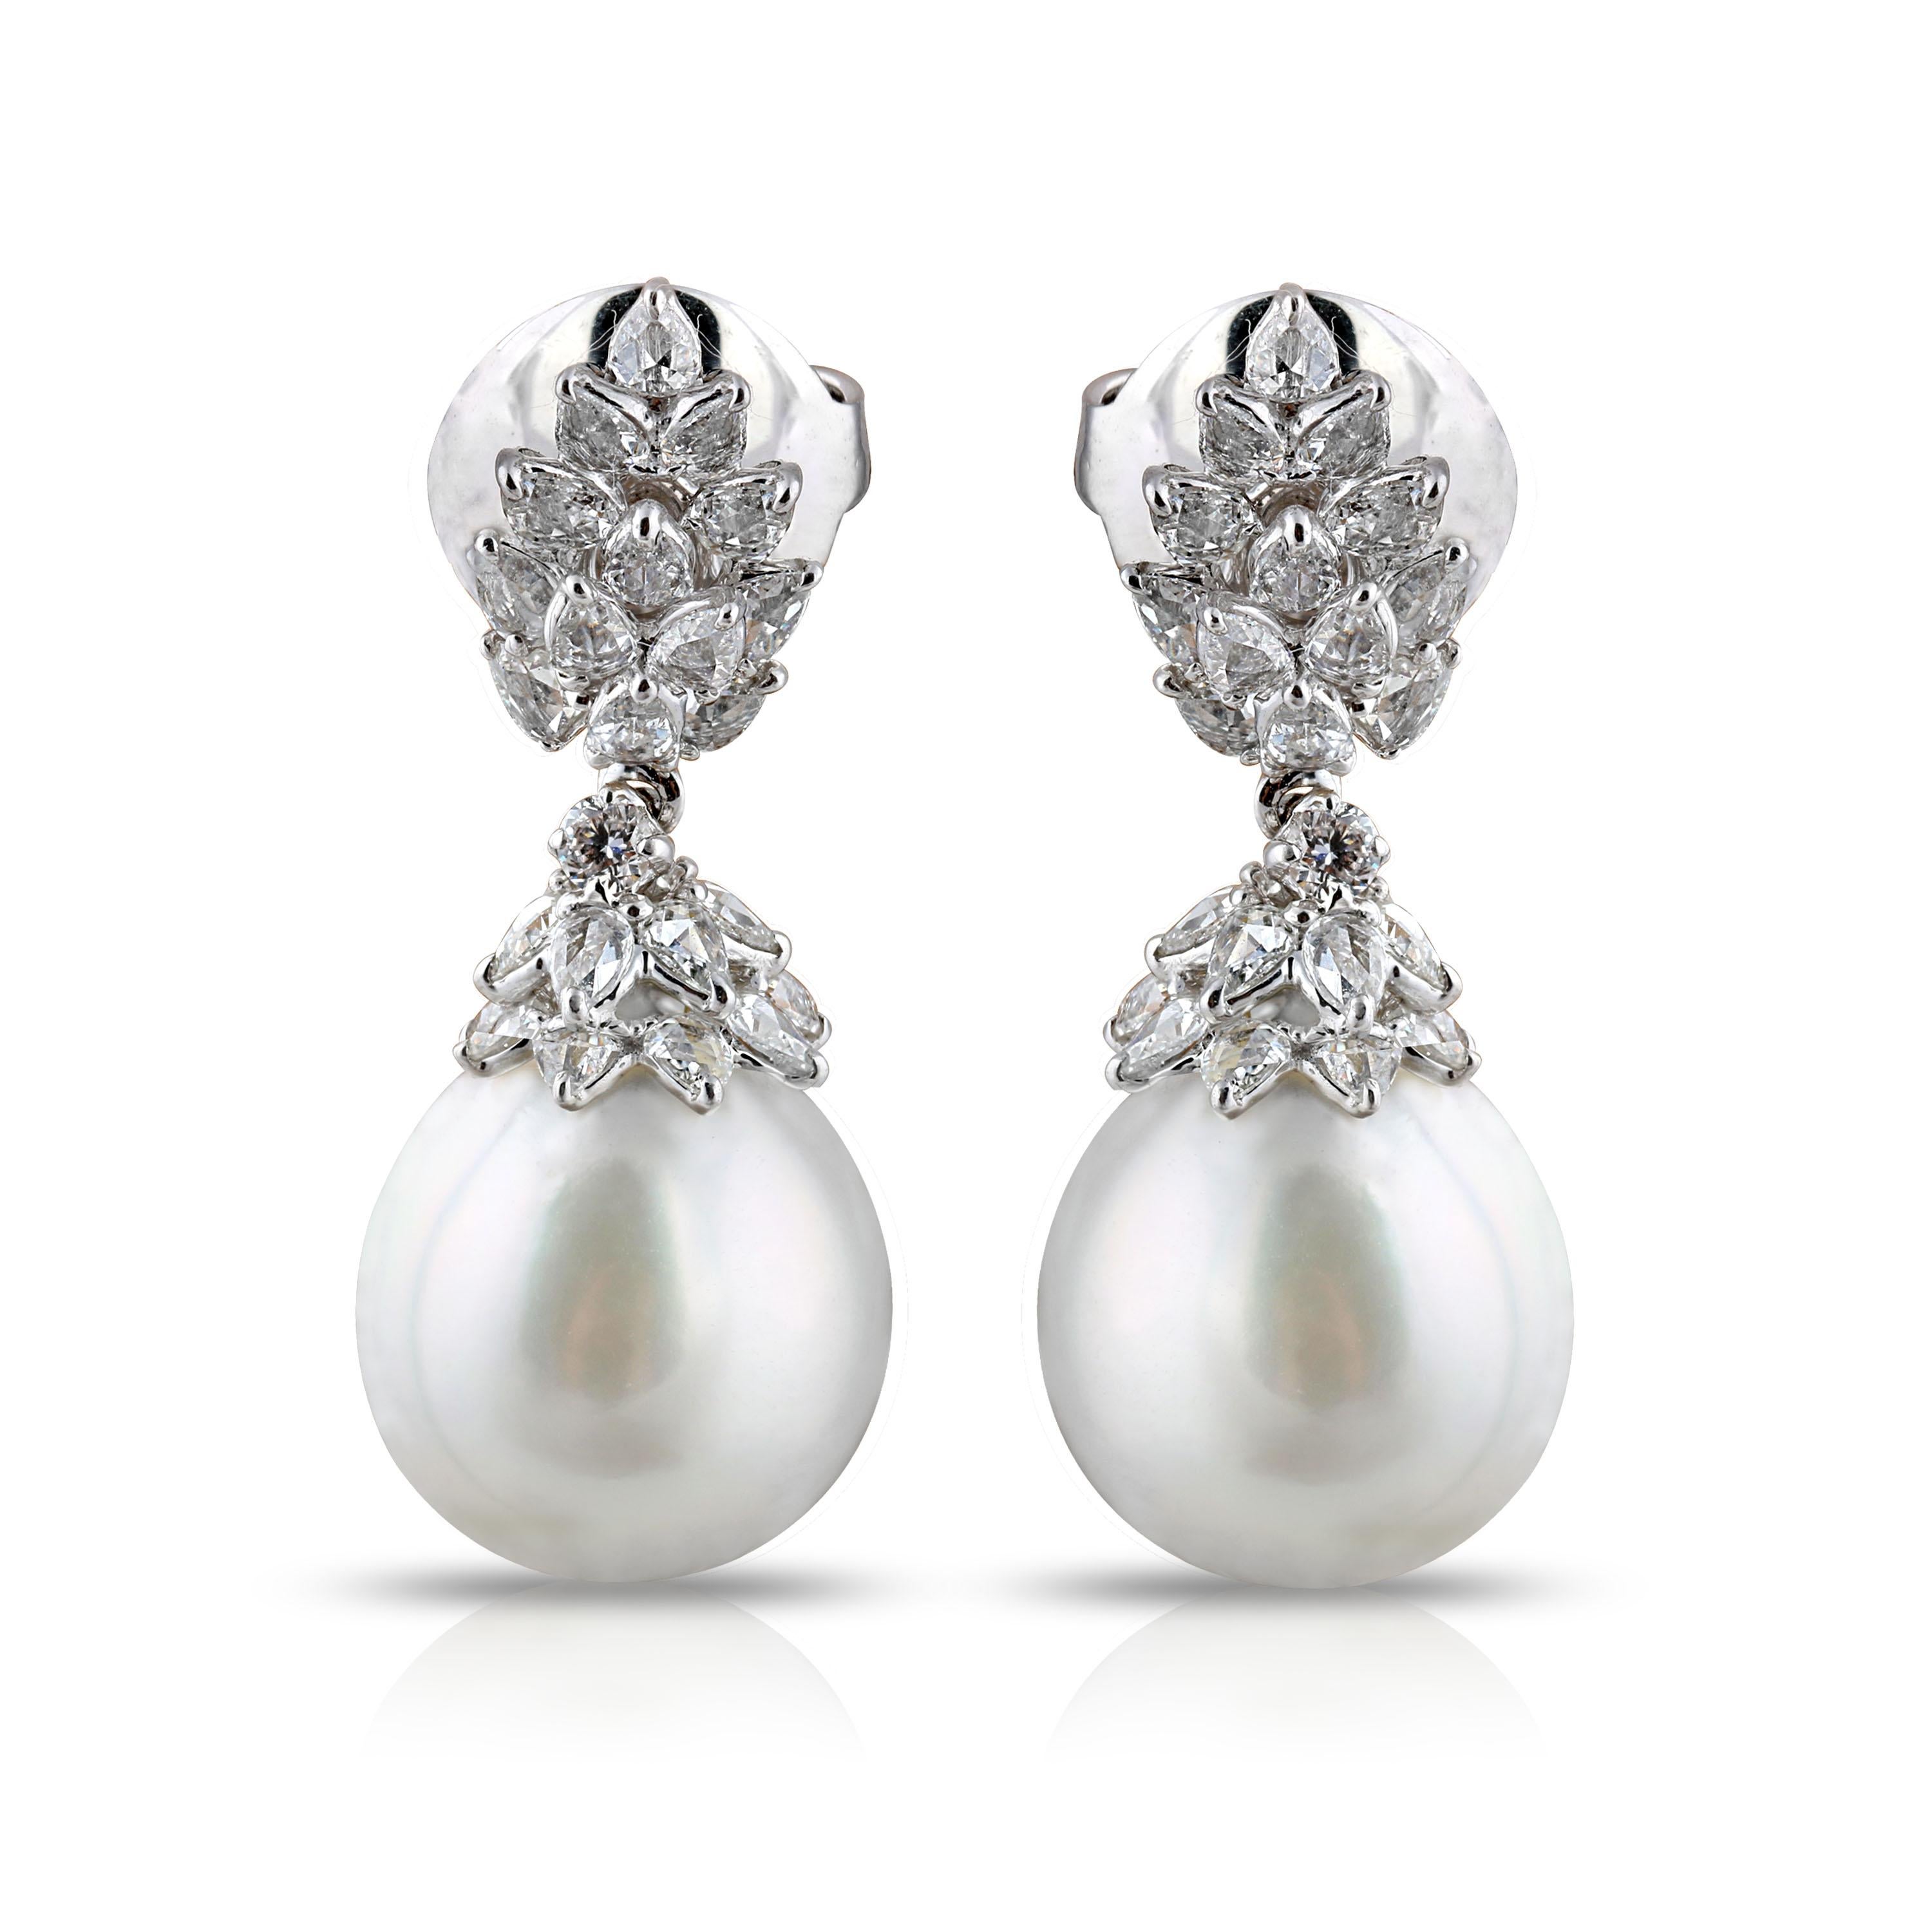 South Sea pearls and rosecut diamond earrings

This pair of 18K white gold earrings adorned with South Sea pearls and pear rose cut and round brilliant cut diamonds in a prong setting is just what you need to enhance your repertoire with grace. Its